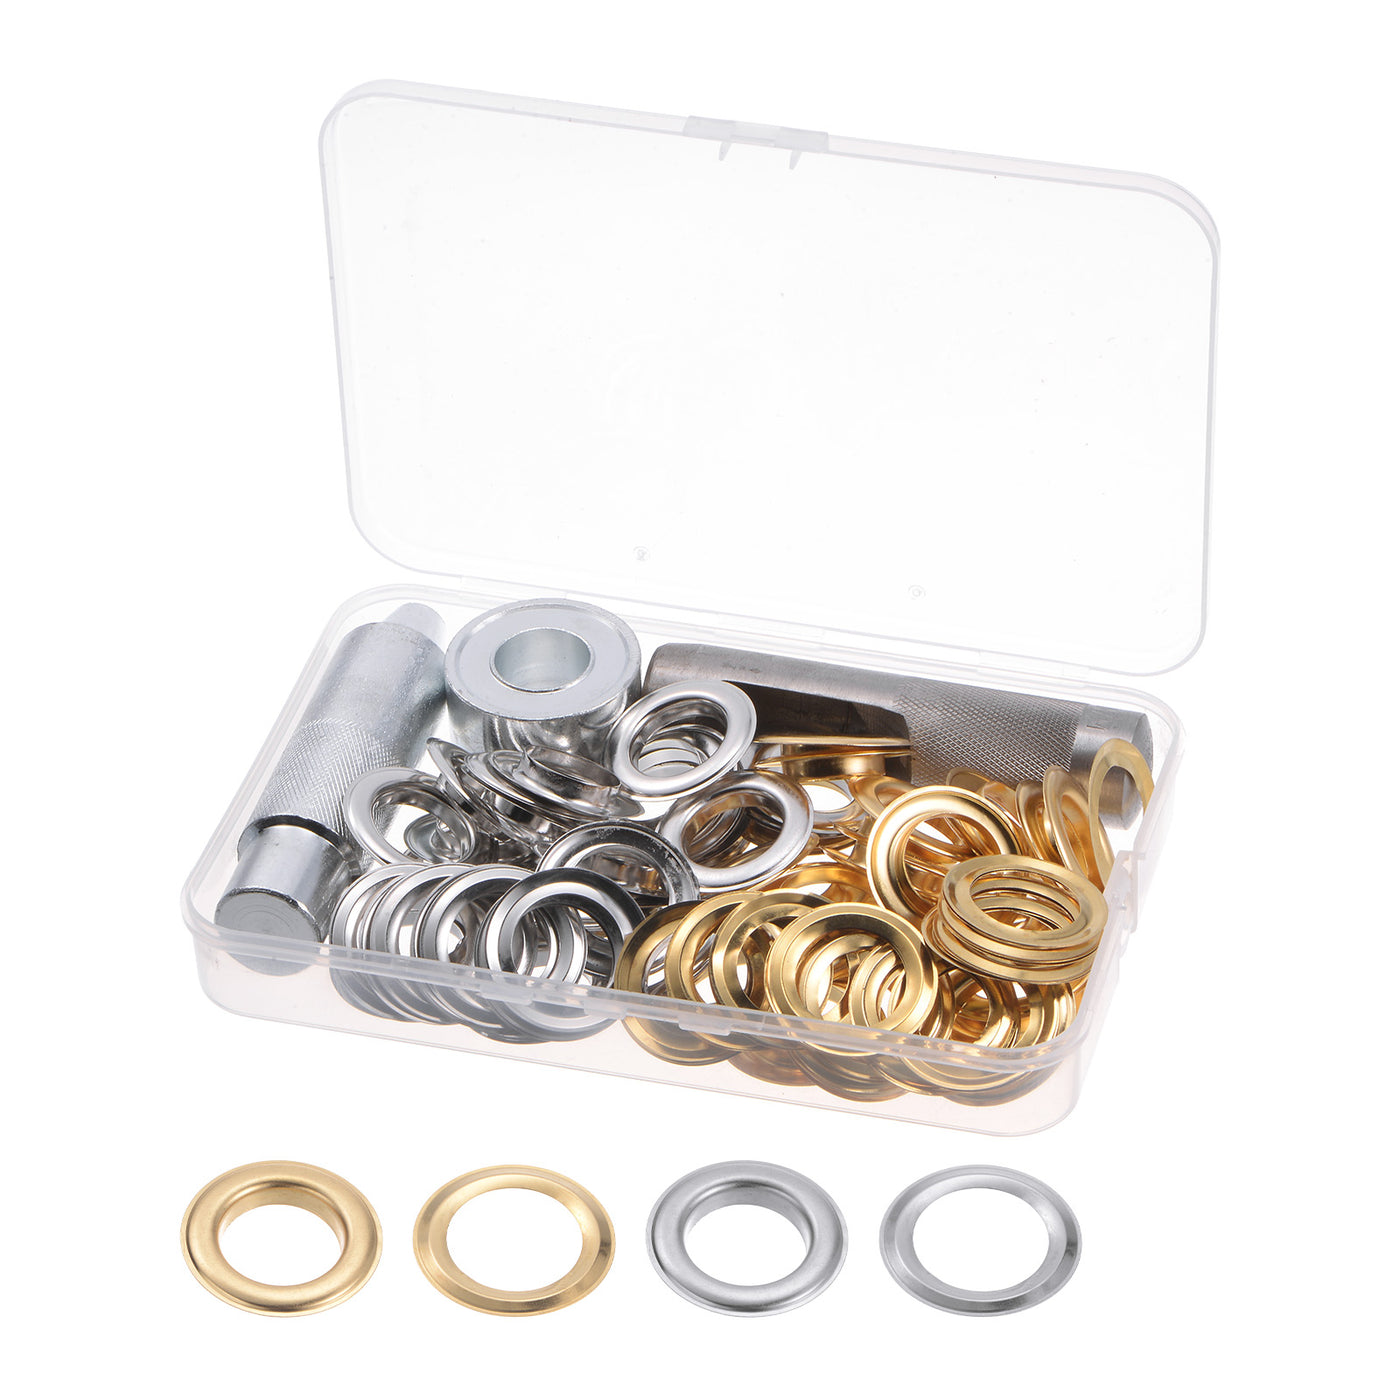 Uxcell Uxcell 2 Colors Grommet Kit 50 Set 20mmx33mm Dia Copper Grommets Eyelets with 3 Tools